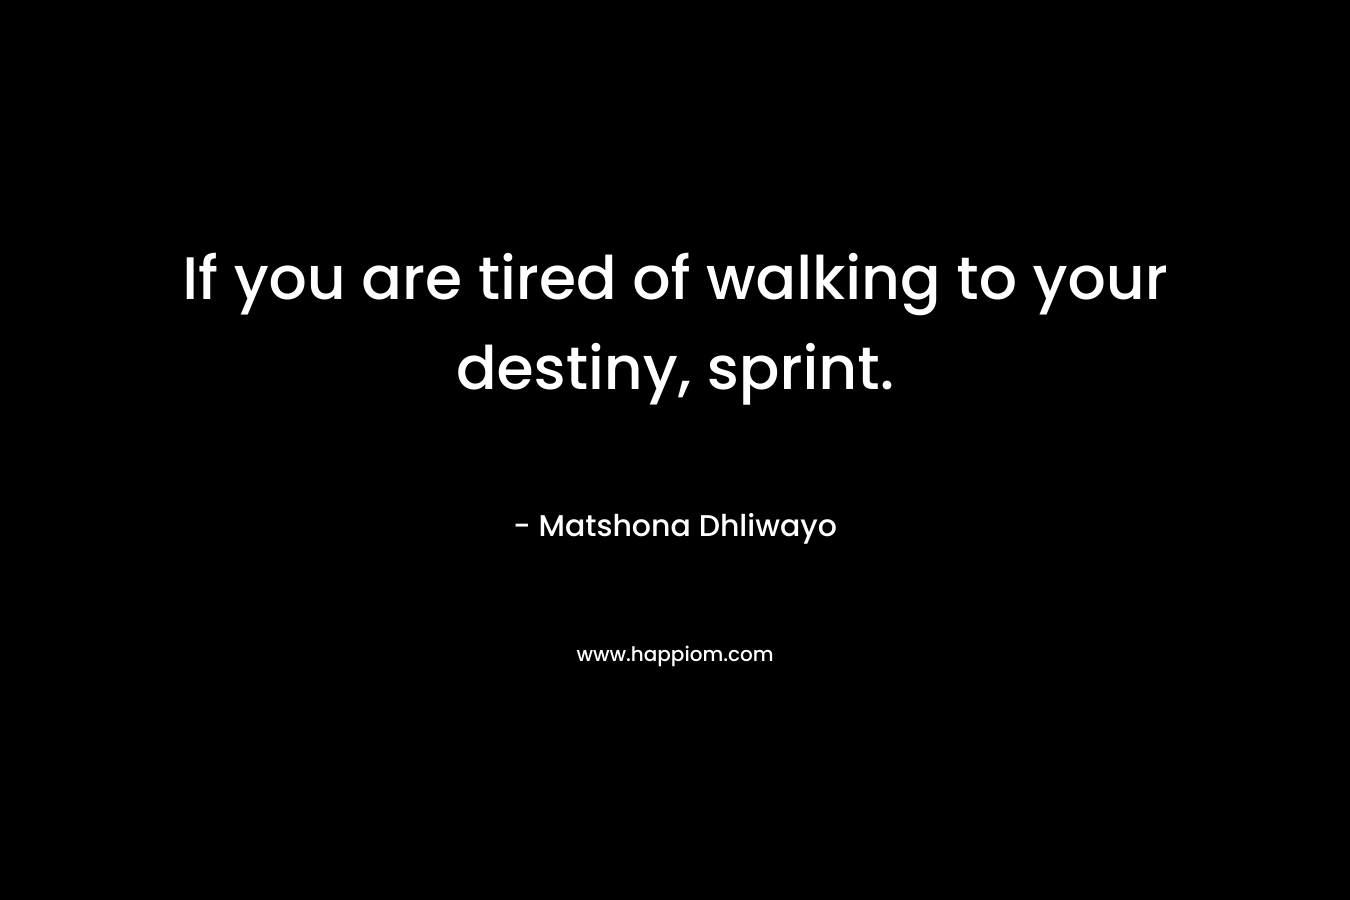 If you are tired of walking to your destiny, sprint.